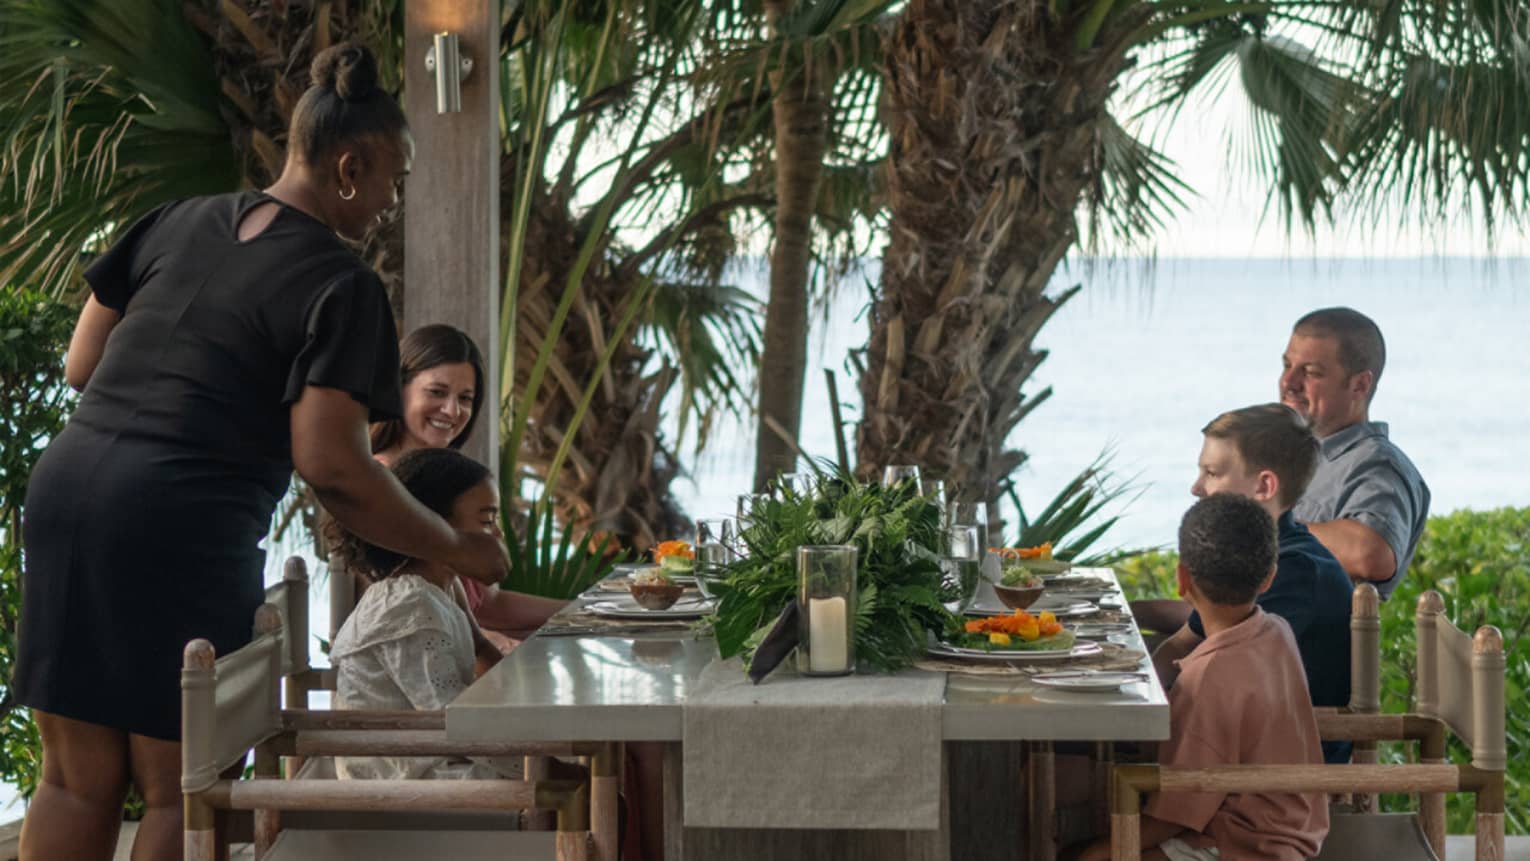 A family smiles while being served a meal at an outdoor dining table with an ocean view